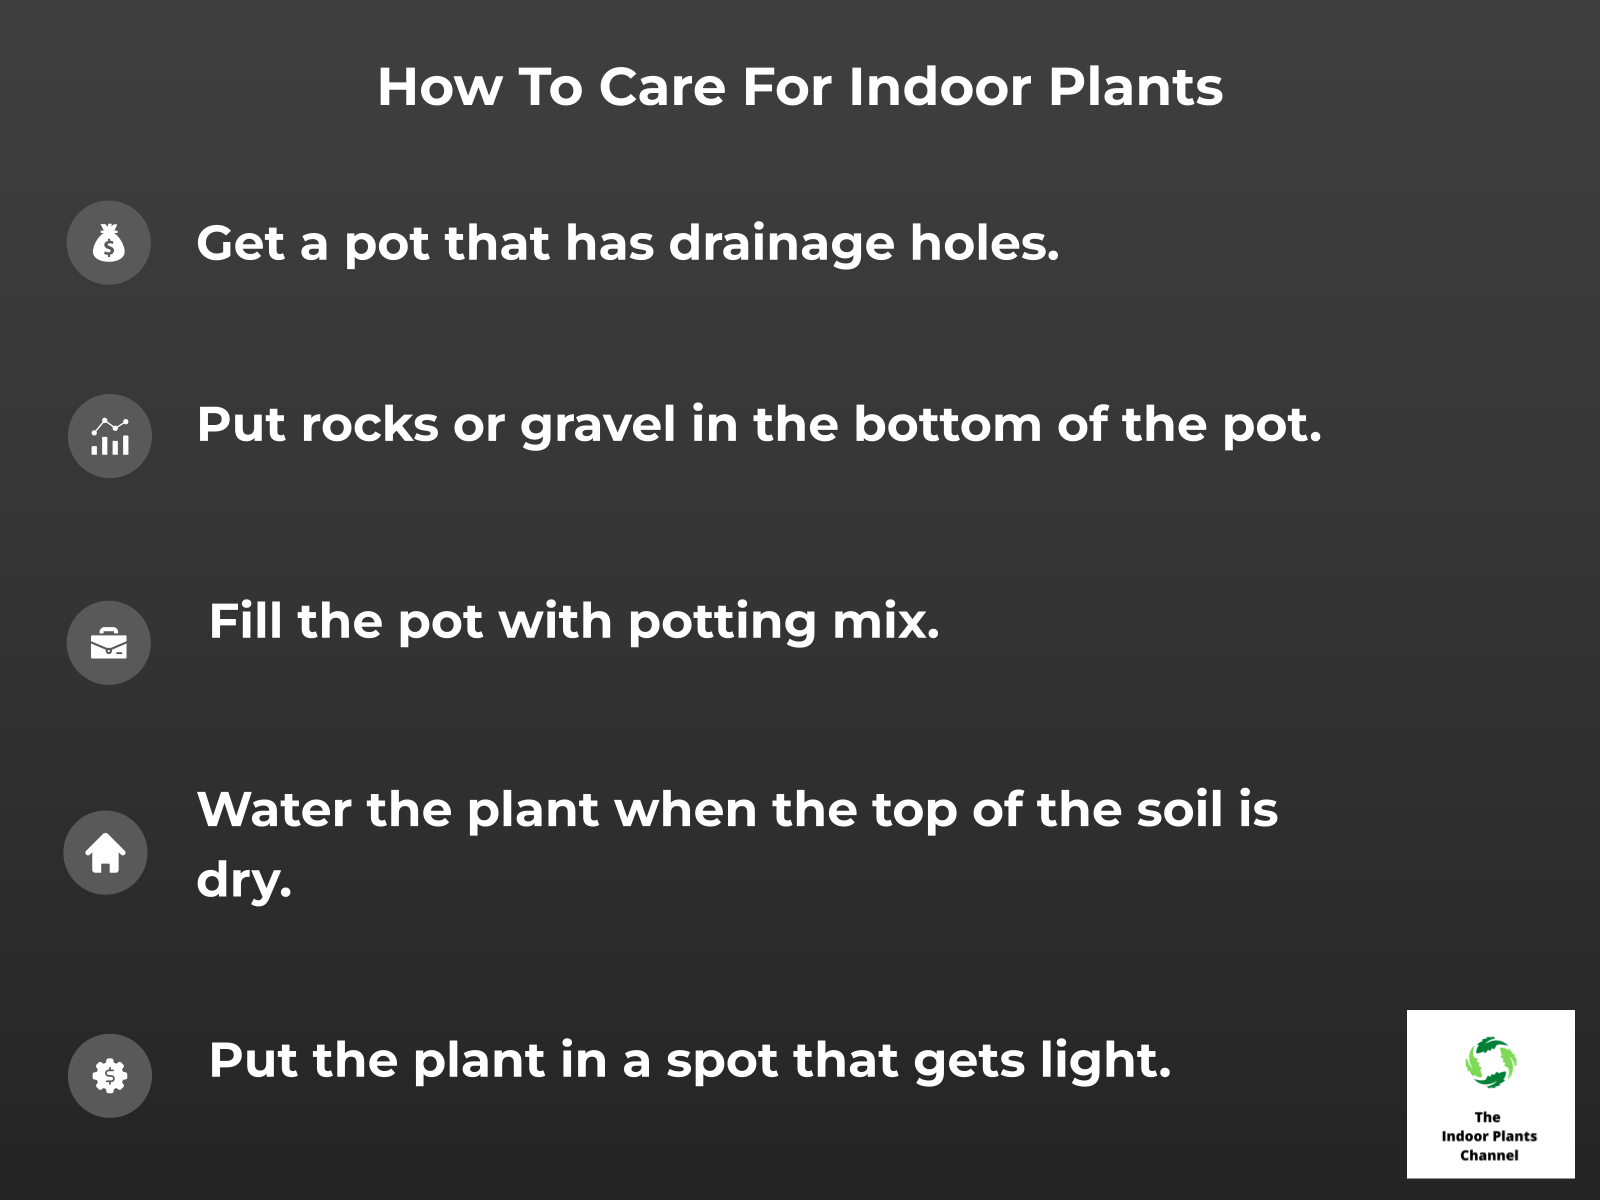 INFOGRAPHIC: How to care for indoor plants